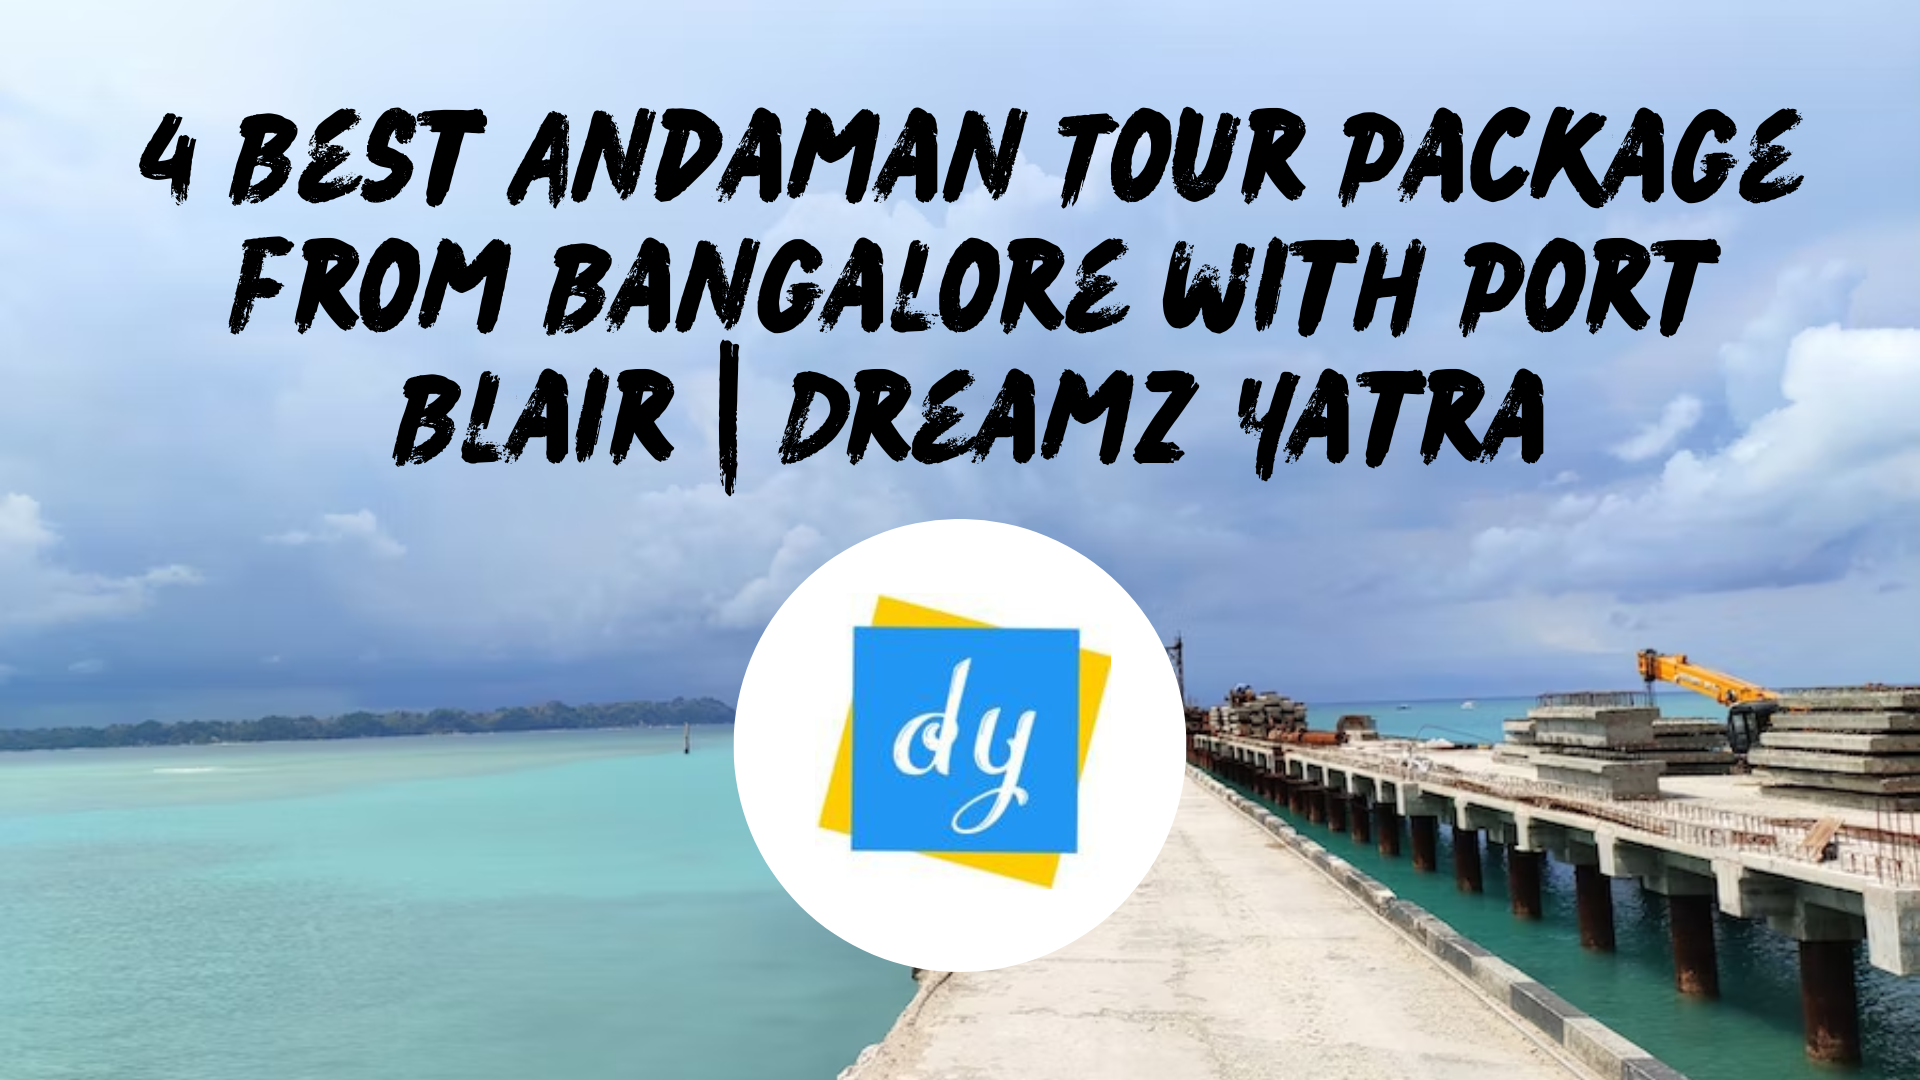 andaman tour package including airfare from bangalore